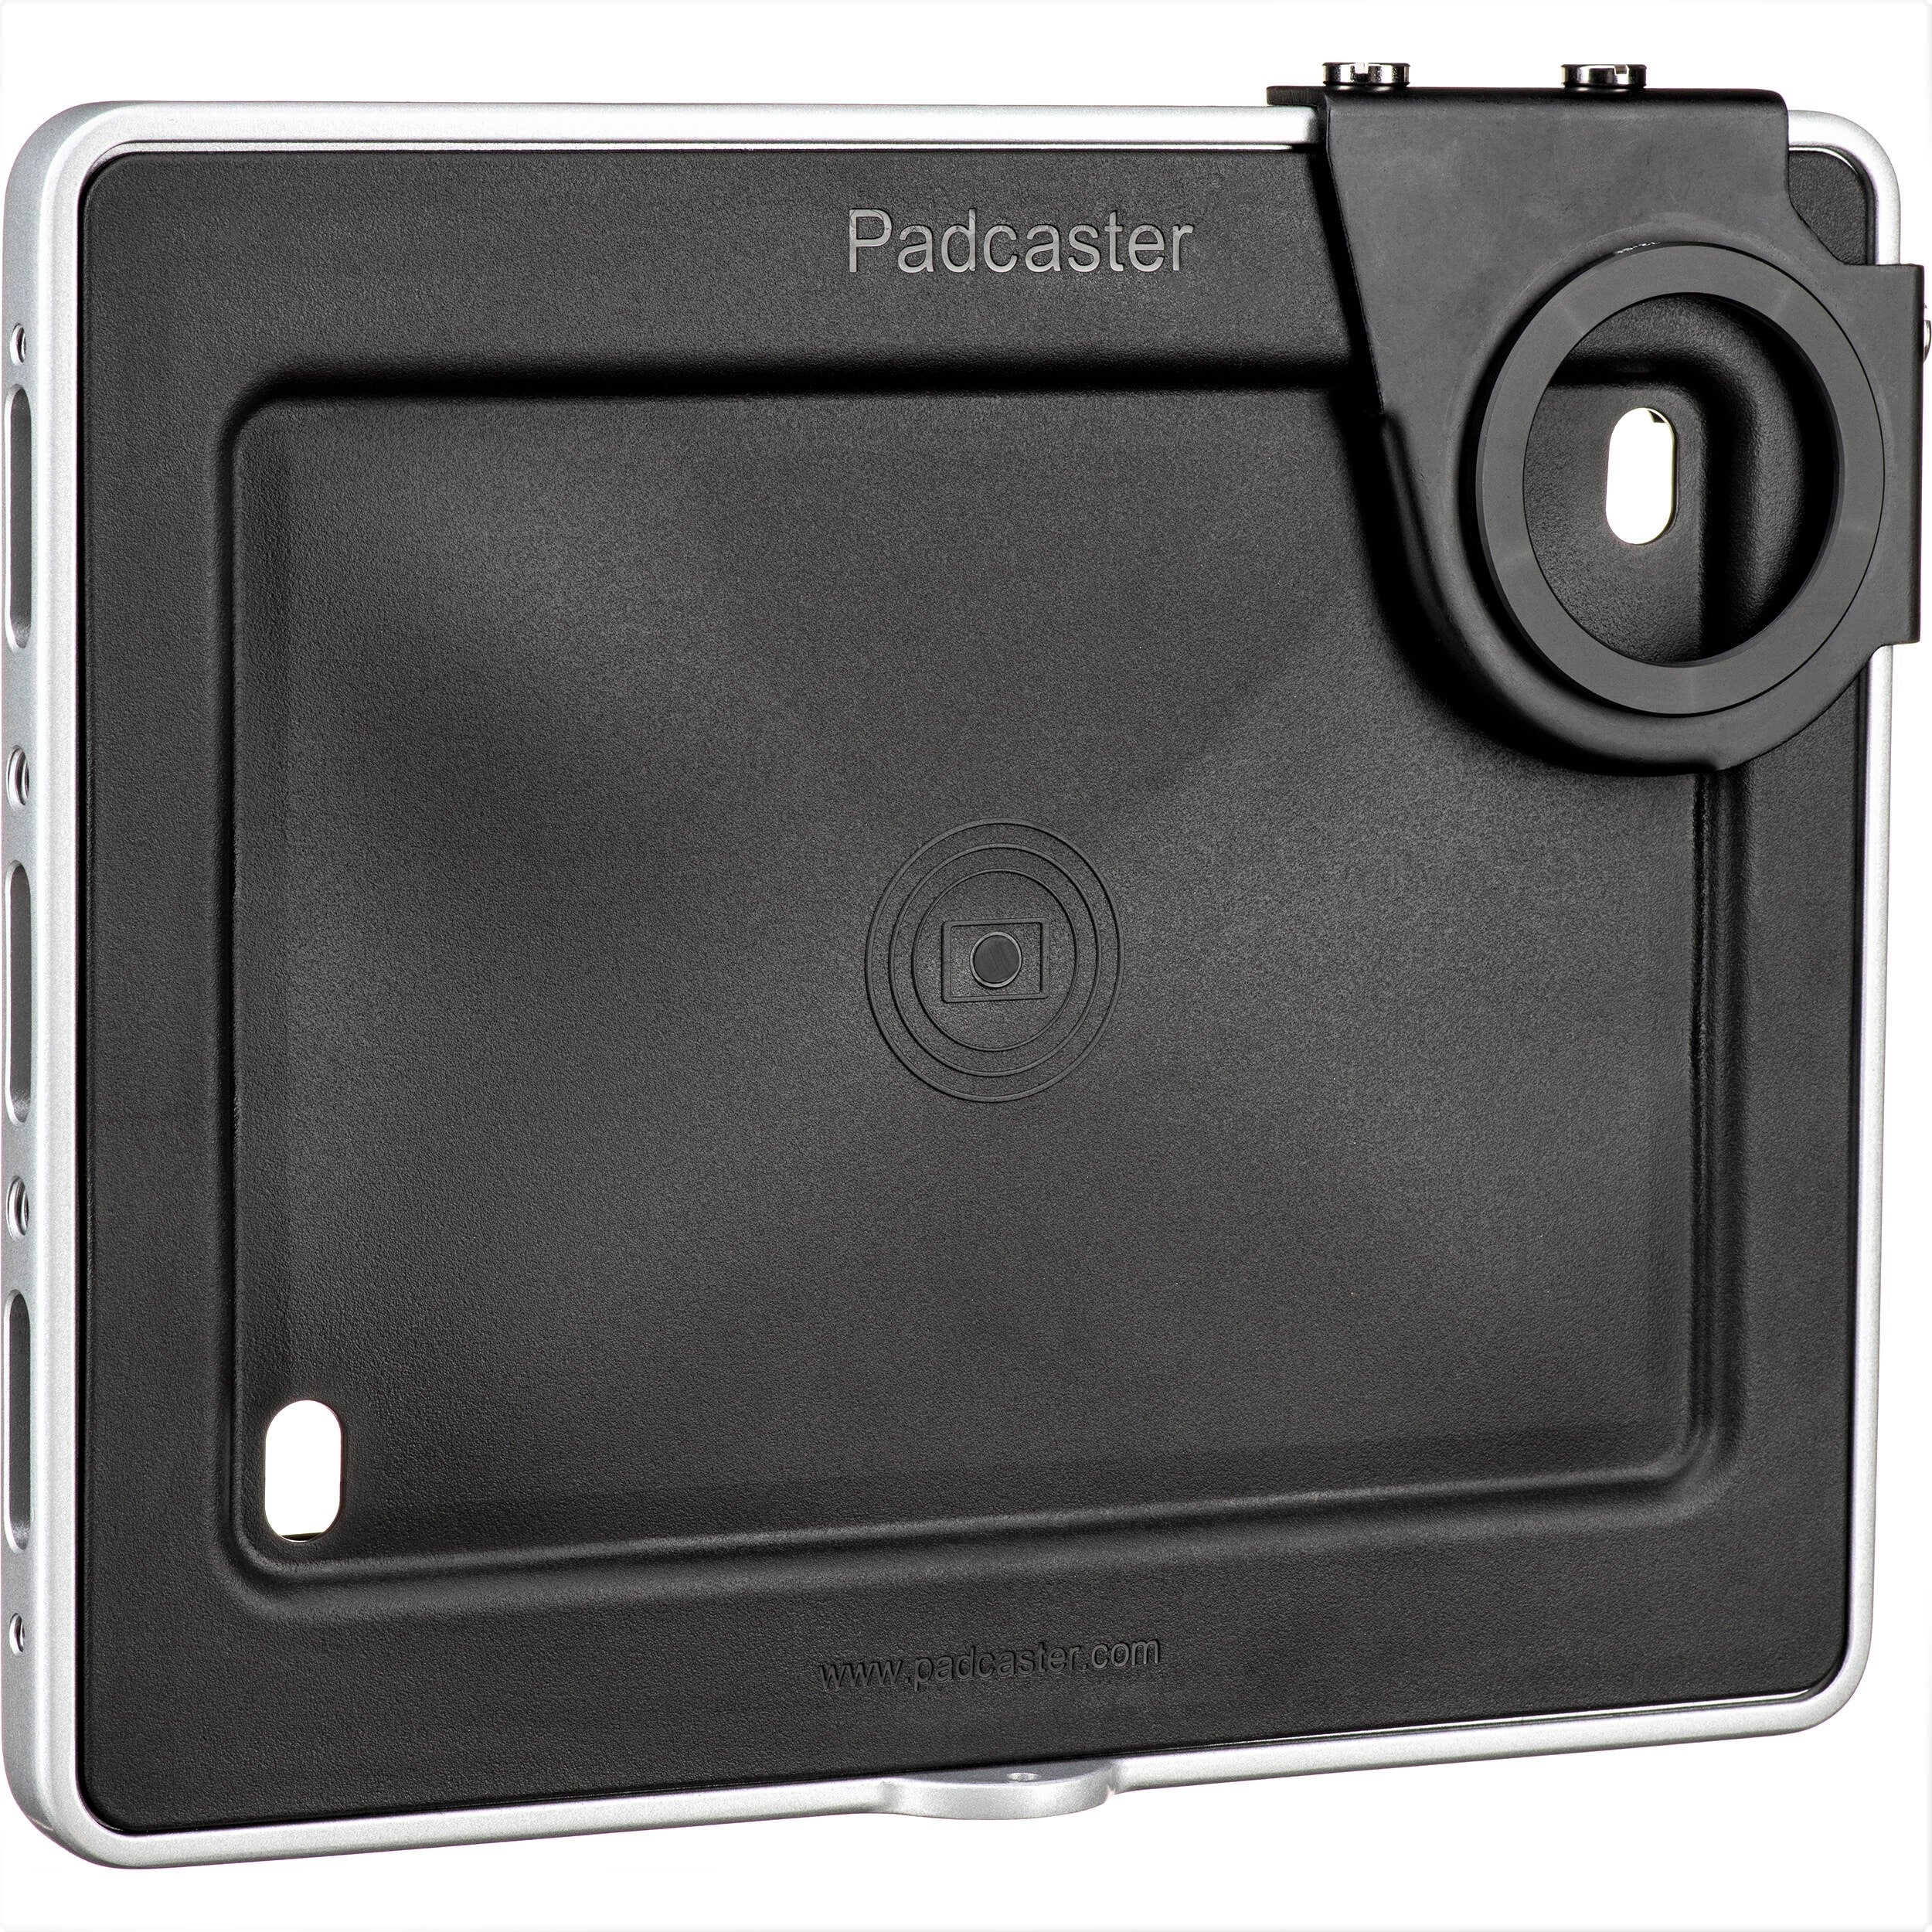 Padcaster Case for iPad 7th Gen 10.2 in a Back View